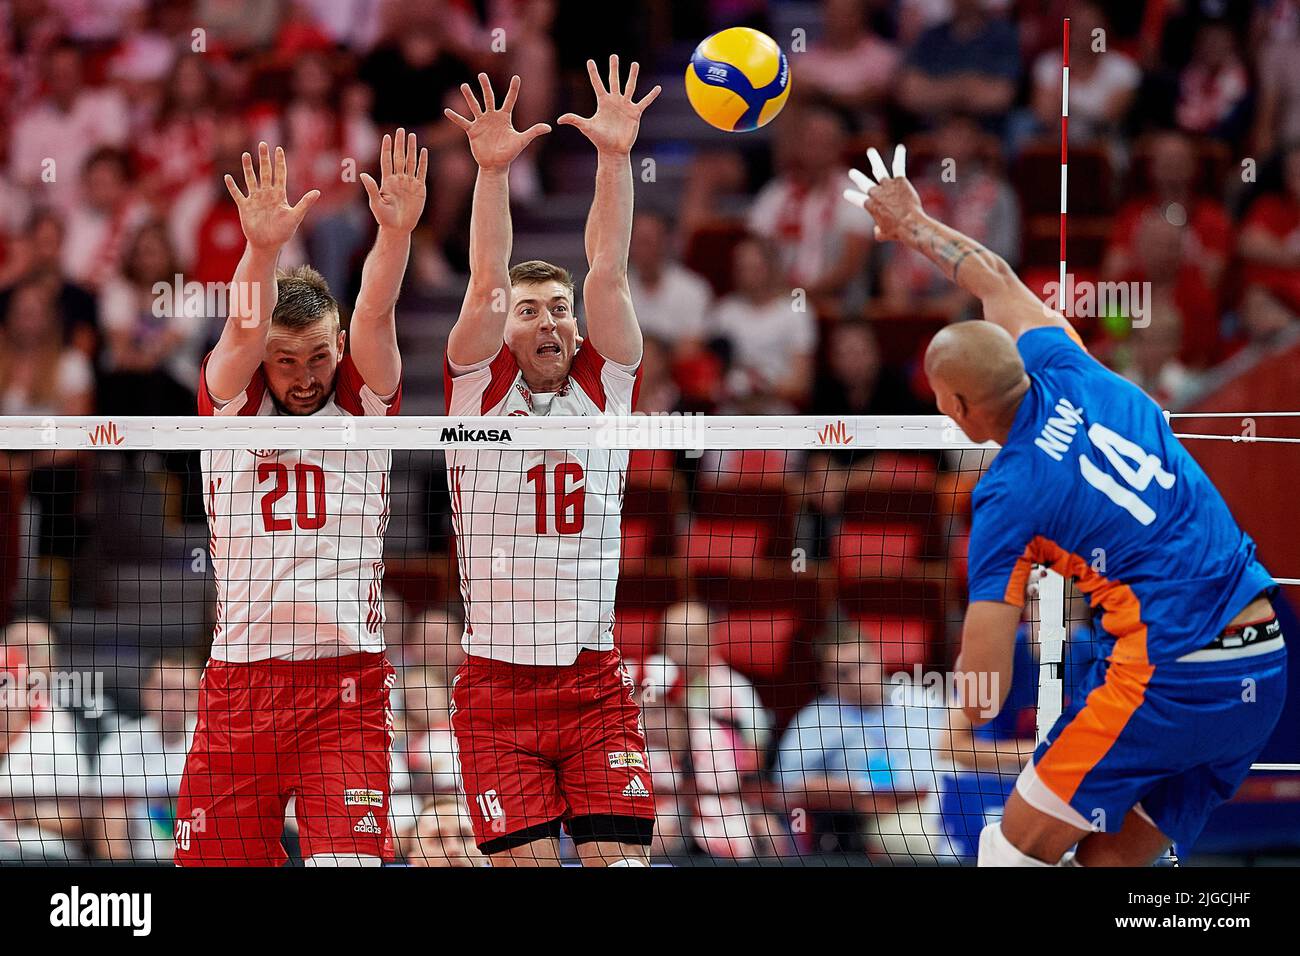 Gdansk, Poland. 09th July, 2022. Mateusz Bieniek (L) and Kamil Semeniuk (C) of Poland and Nimir Abdel-Aziz (R) of the Netherlands during the 2022 men's FIVB Volleyball Nations League match between Poland and the Netherlands in Gdansk, Poland, 09 July 2022. Credit: PAP/Alamy Live News Stock Photo